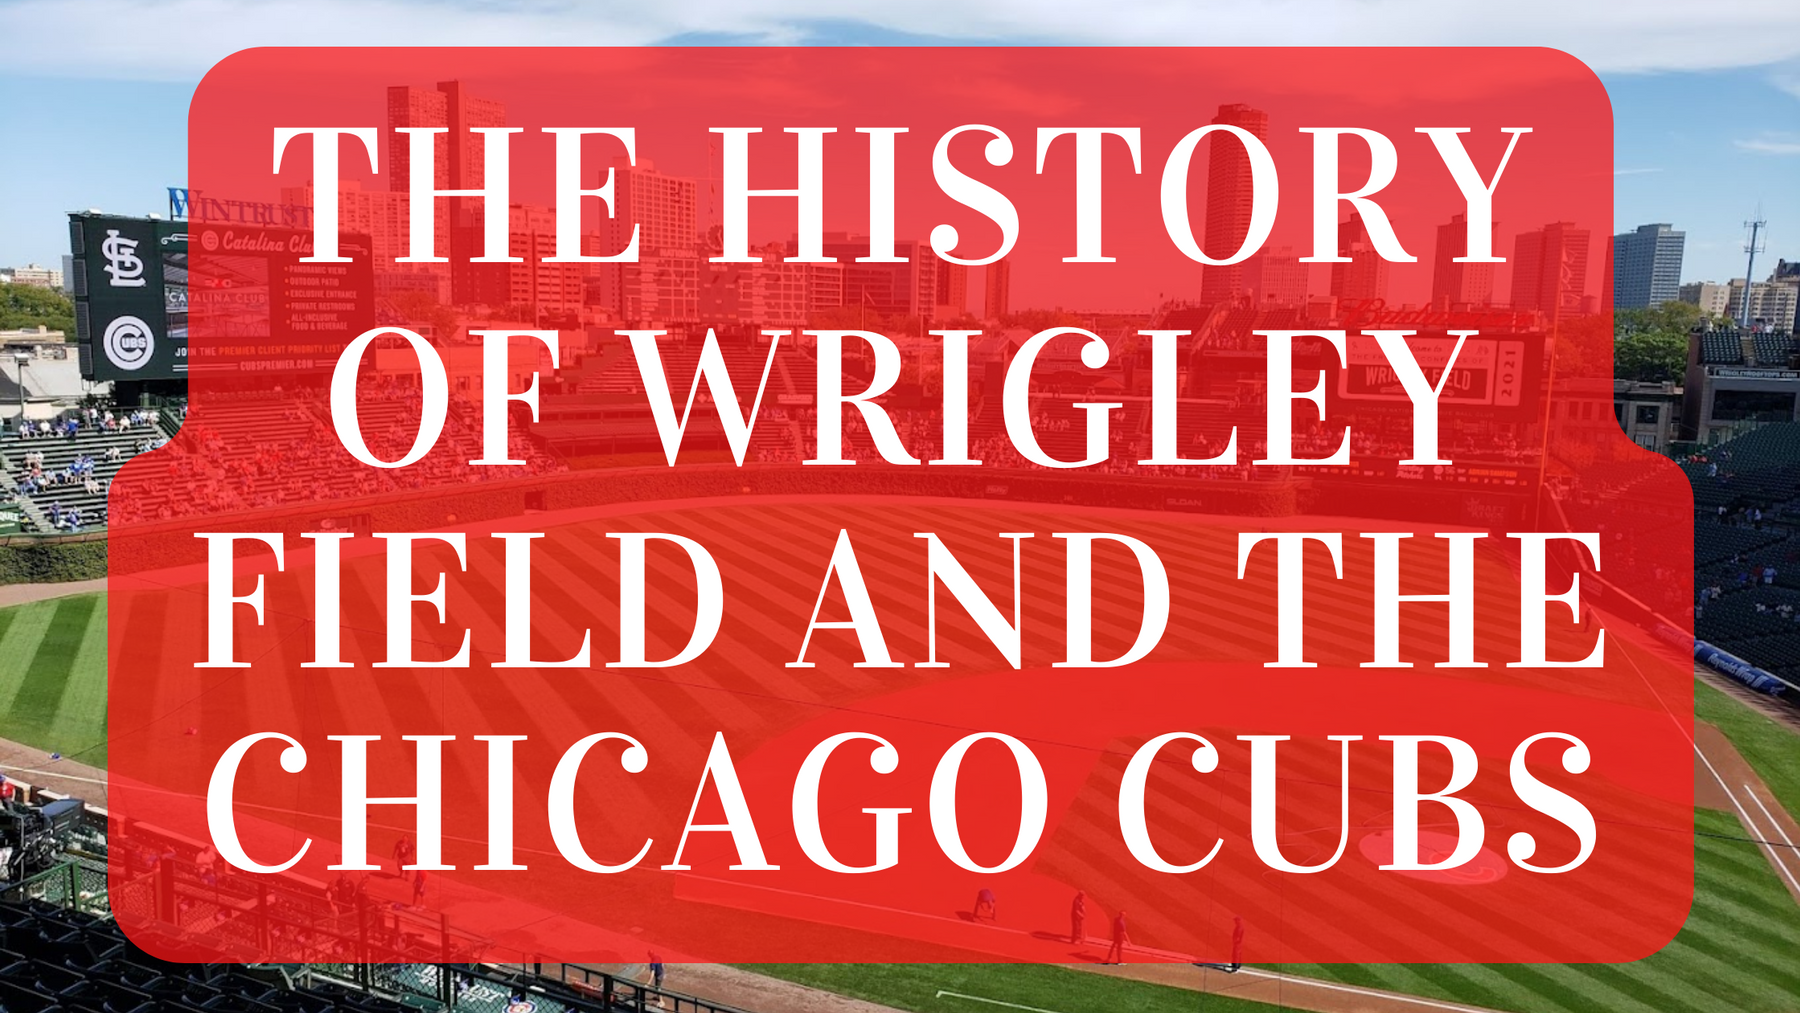 Experience Baseball History at Wrigley Field - The Iconic Home of the Chicago Cubs